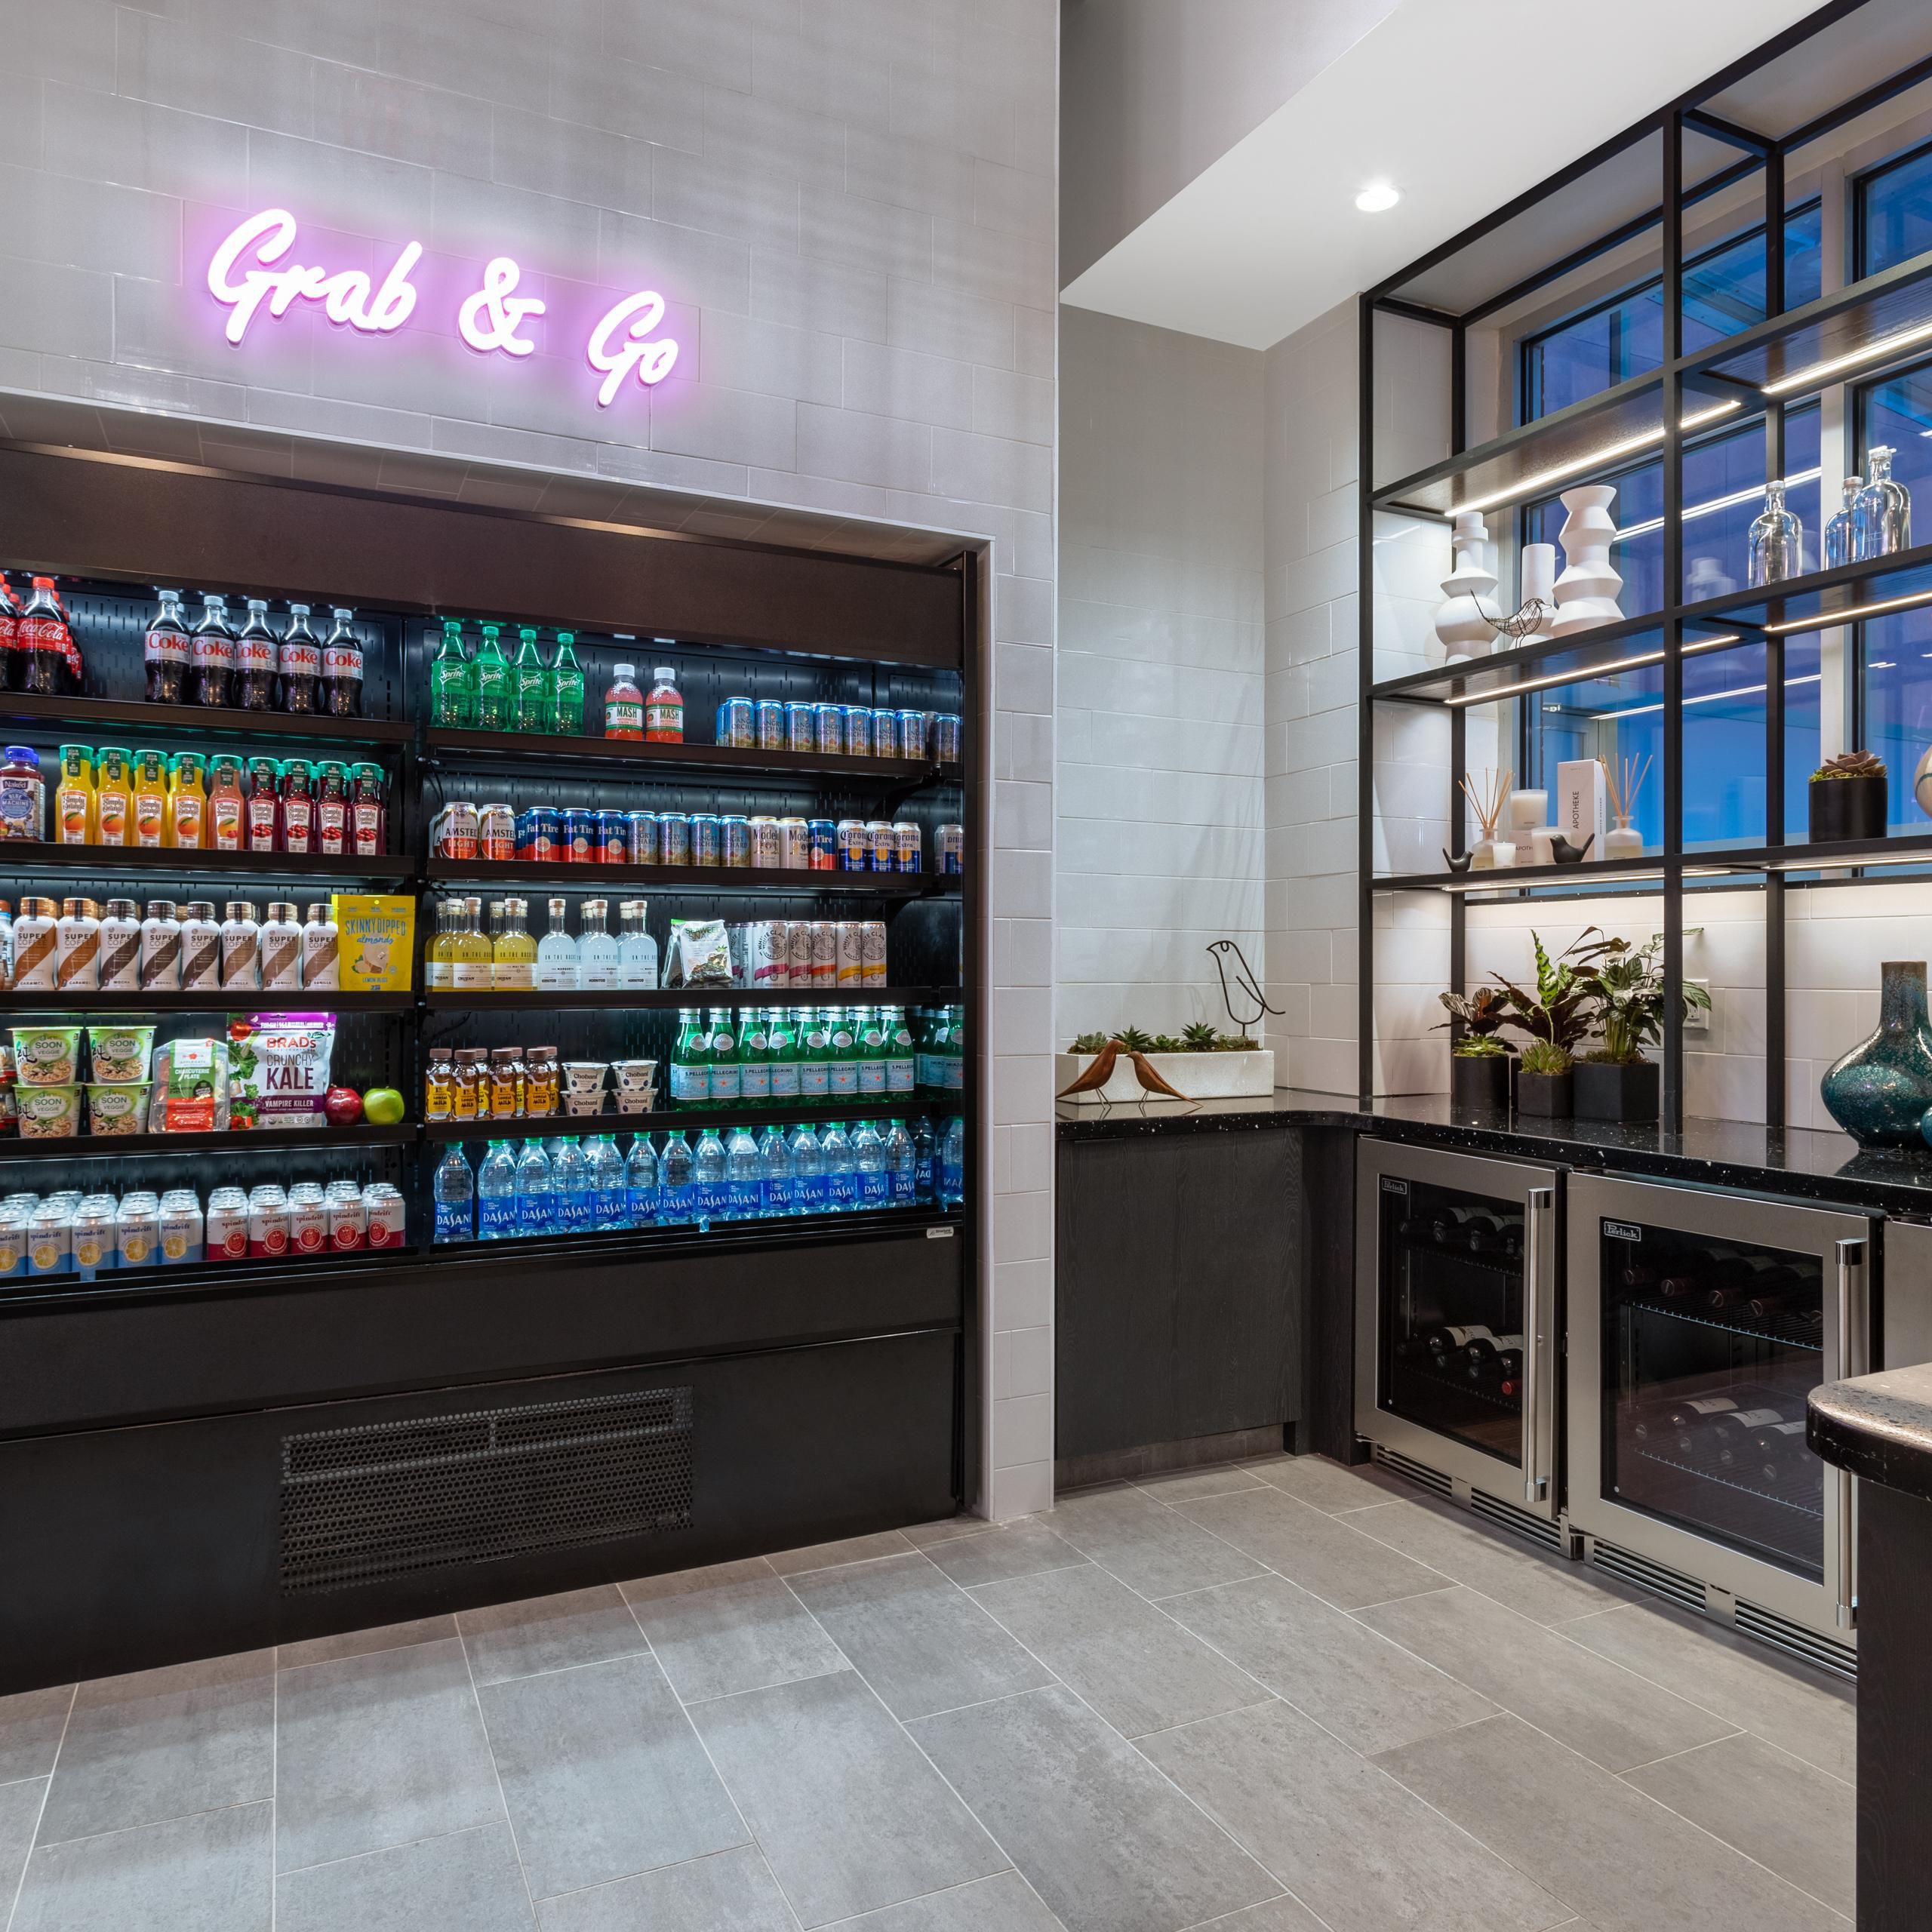 The grab and go market is open 24/7 for drinks and snacks.